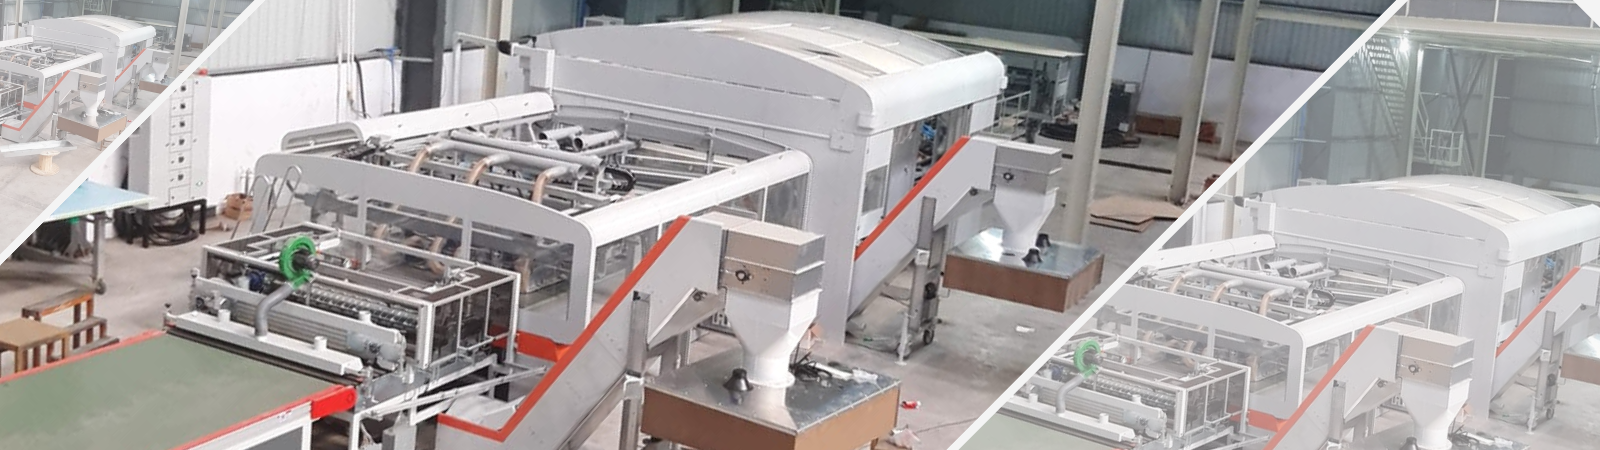  Asian Granito Limited launches the Adicon project with SACMI Continua+ technology